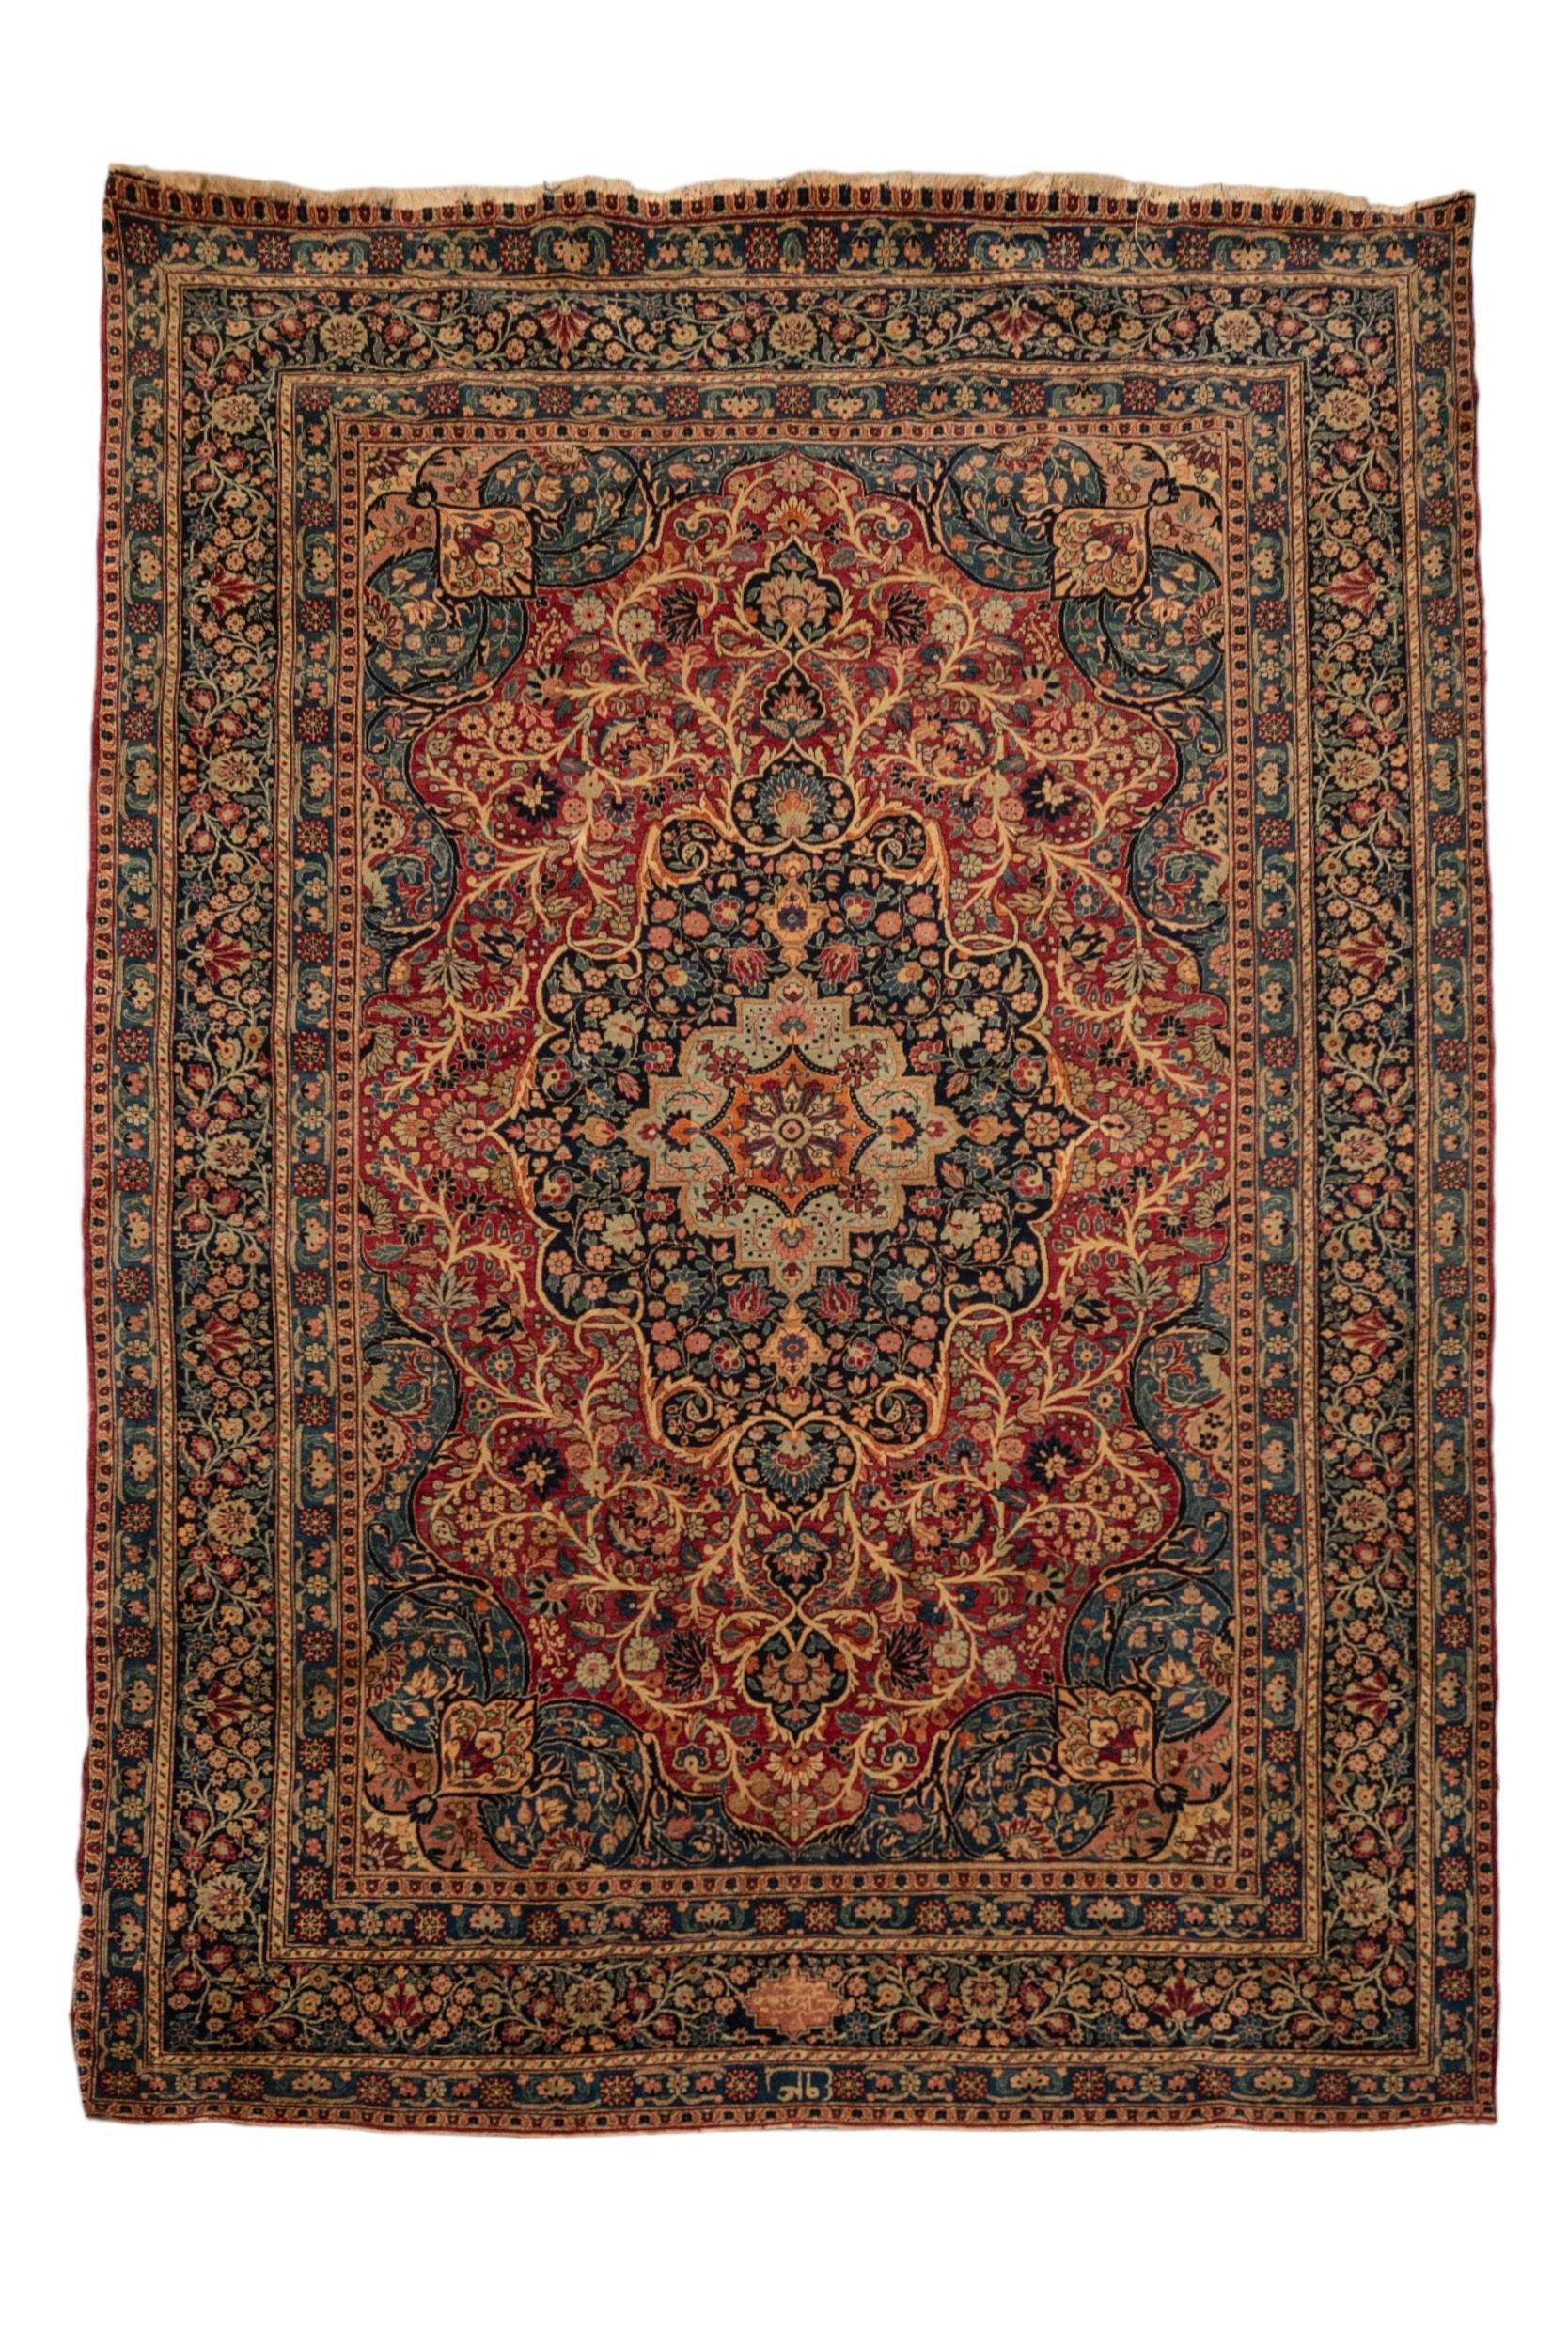 AN EXCEPTIONAL HAND KNOTTED PERSIAN RUG, LATE 19TH / EARLY 20TH CENTURY, probably Keshan, signed, - Image 3 of 3